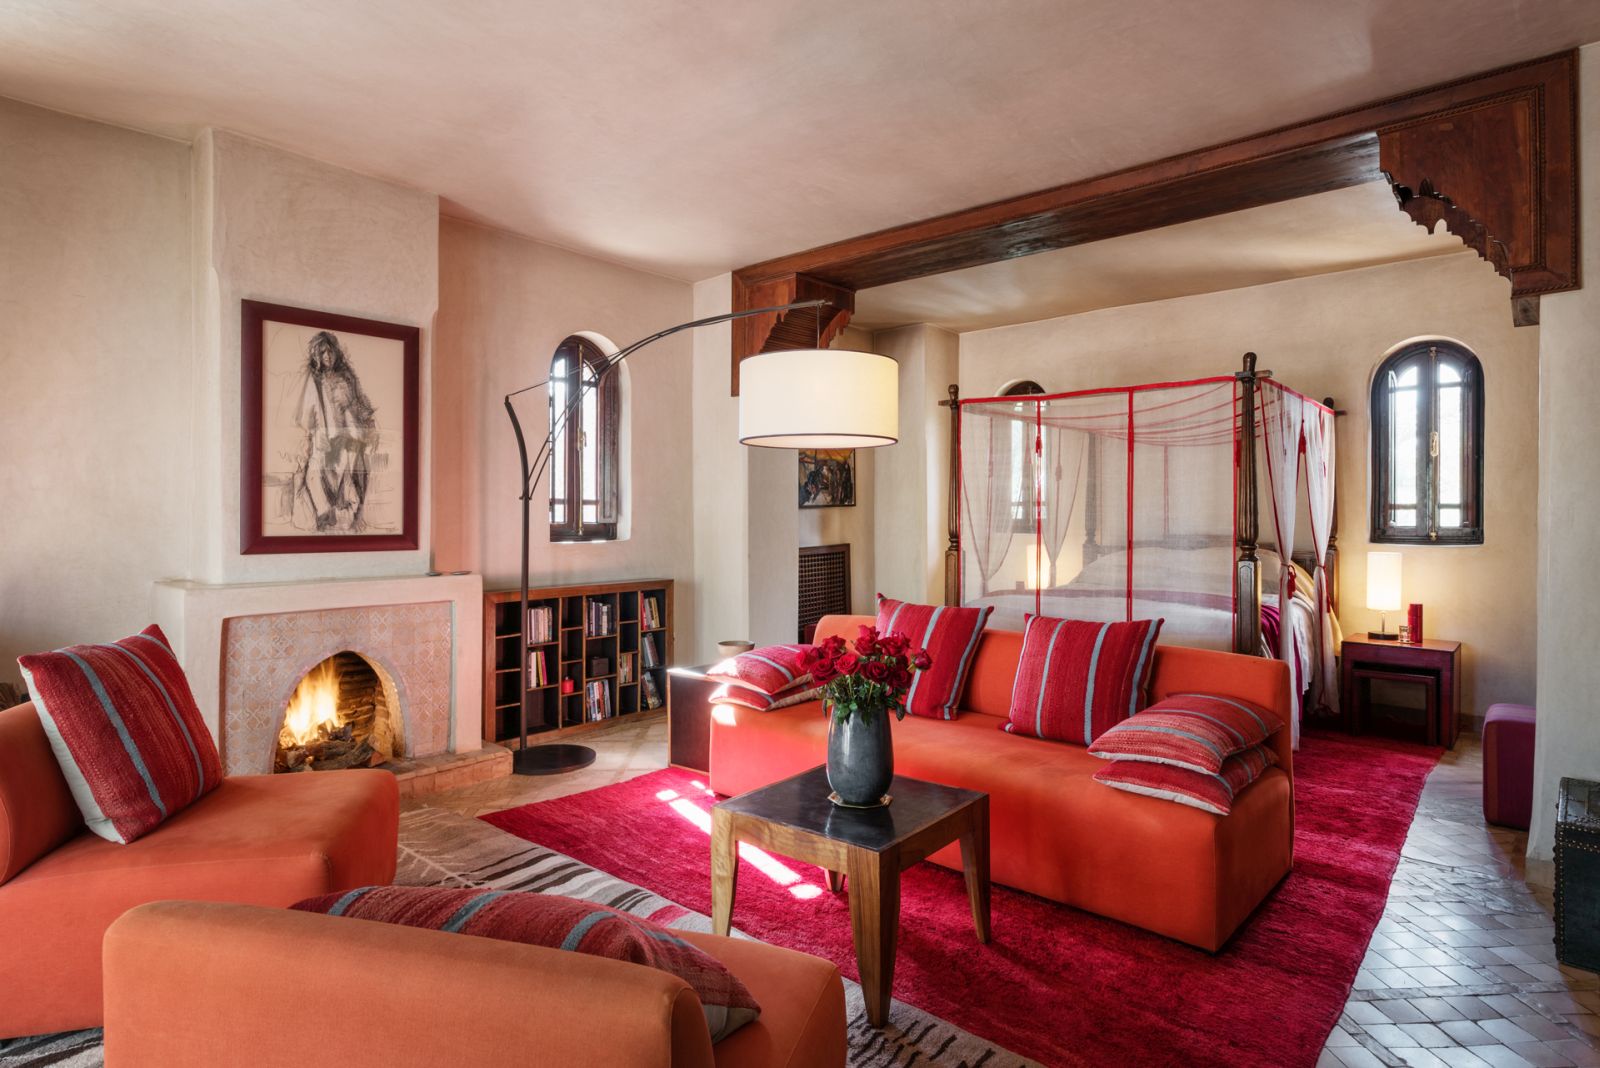 The Perla Suite with four poster bed, sofa, chairs and an open fire at Dar Zemora in Morocco